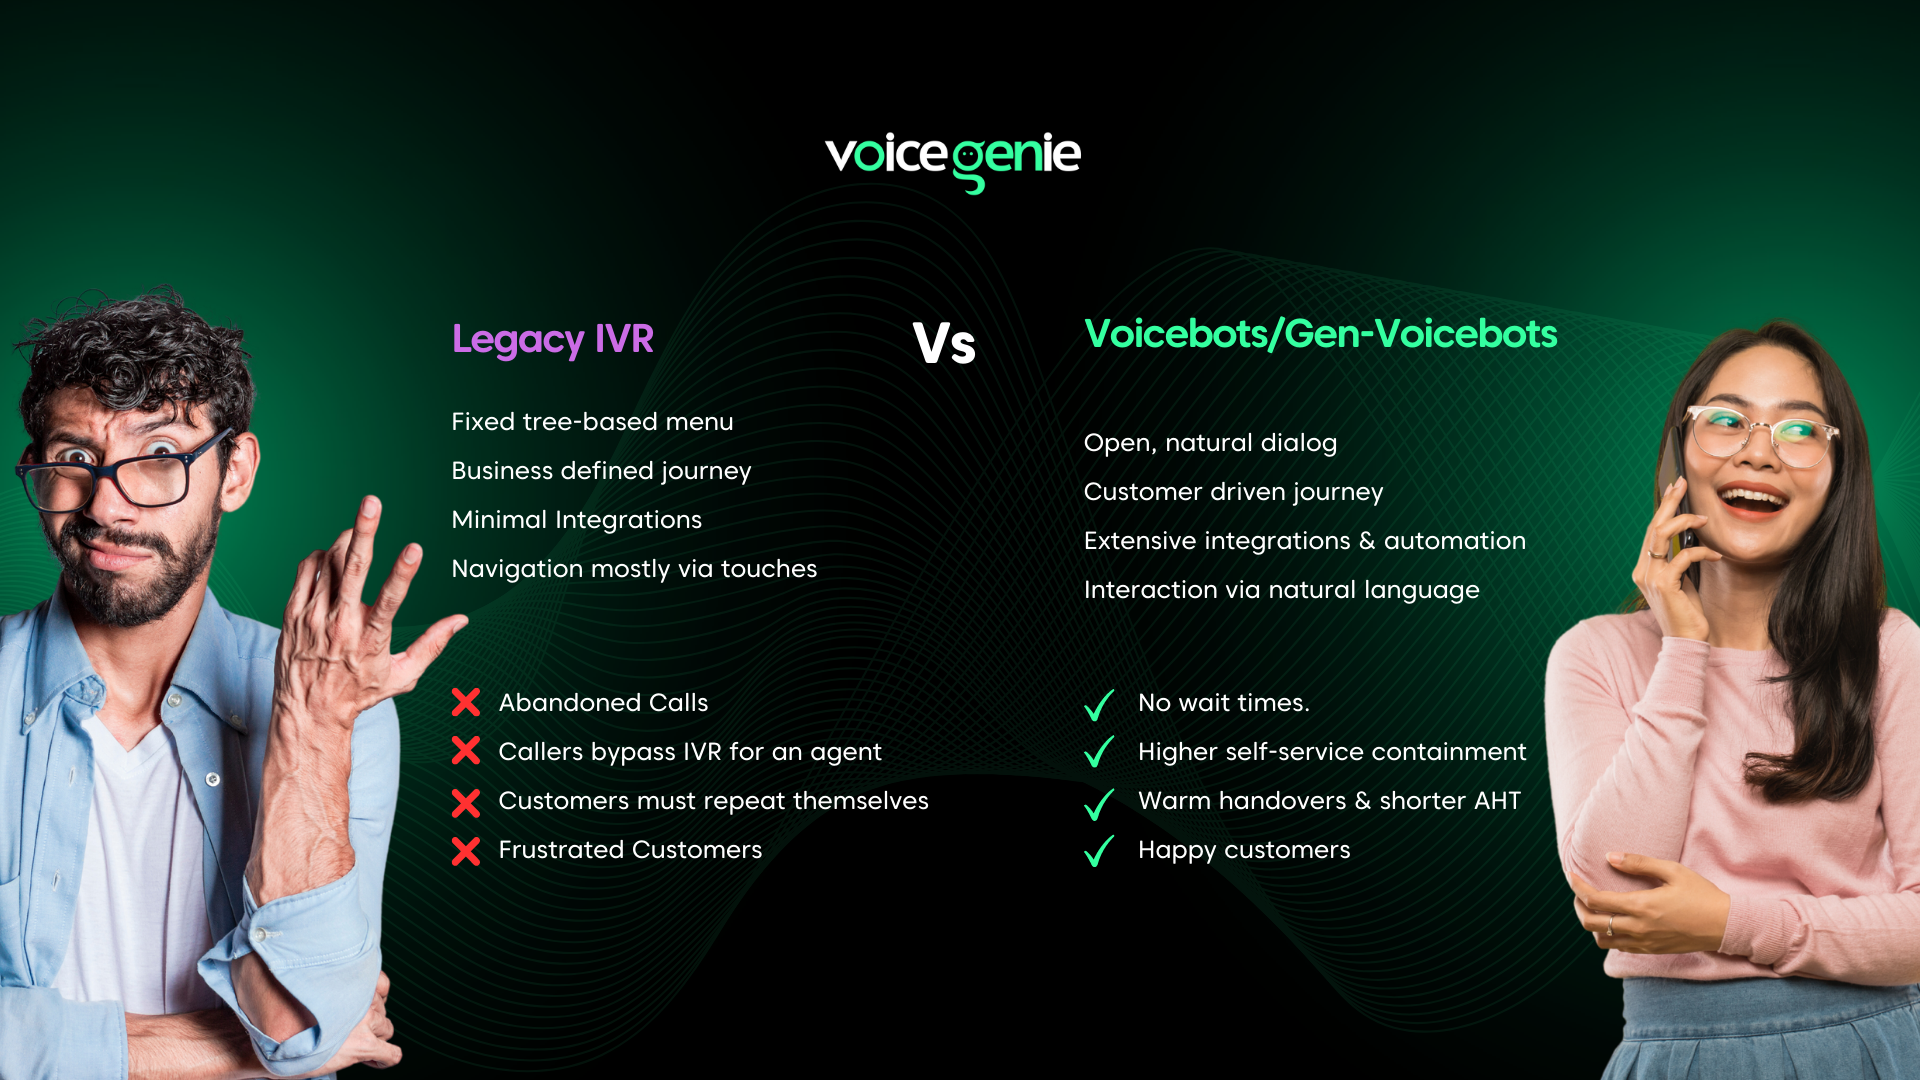 Image showing the common differences in capabilities between AI Voice bots & IVRs